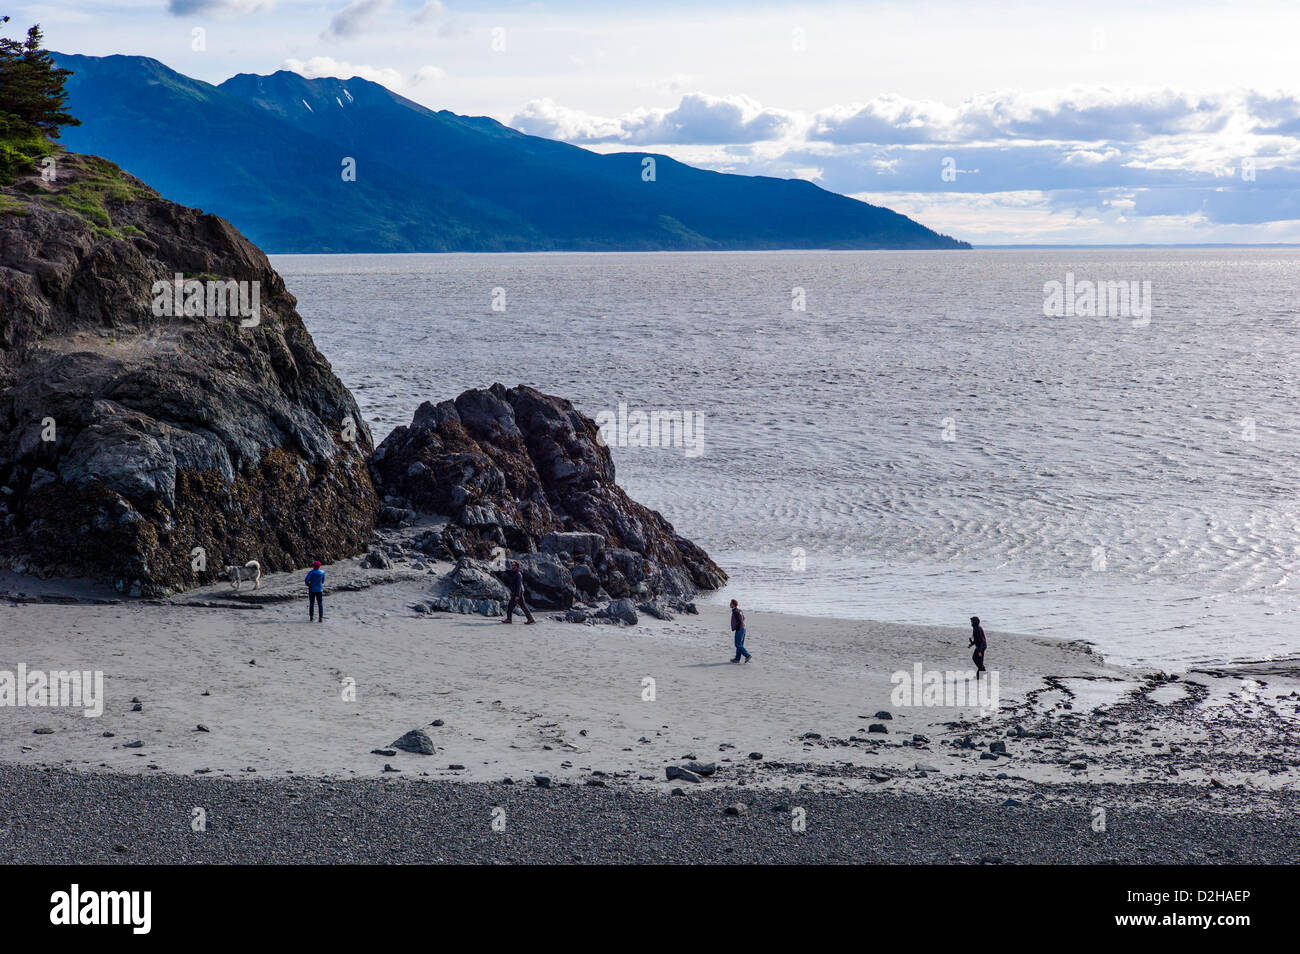 People walk along the beach and rugged landscape of sea and mountains, Turnagain Arm, south of Anchorage, Alaska, USA Stock Photo